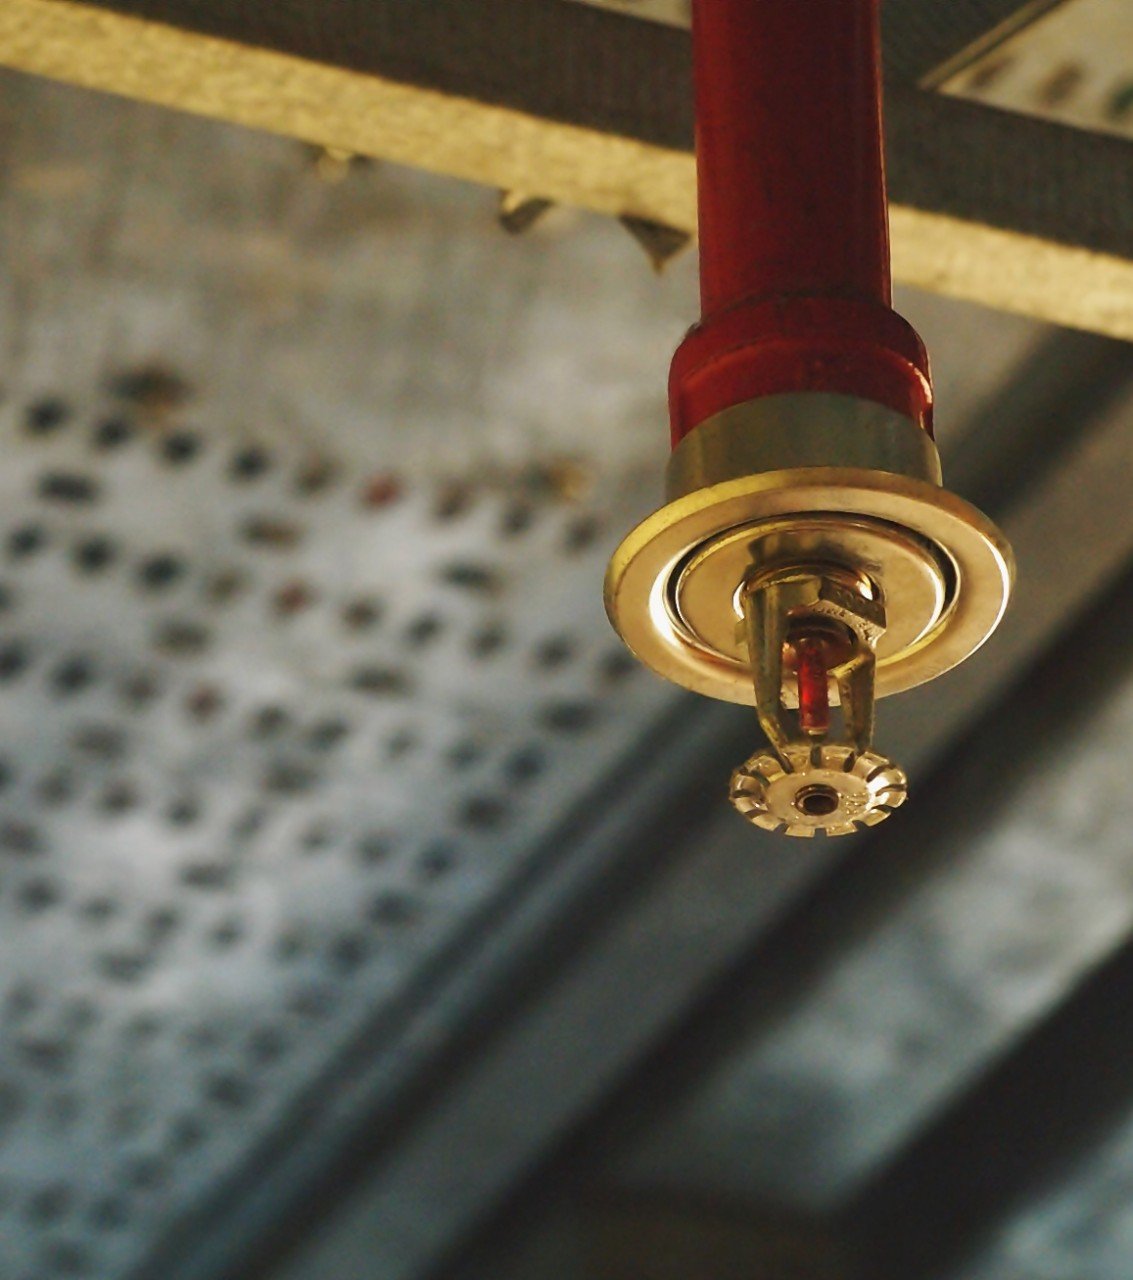 Automatic Fire Sprinkler in red water pipe System